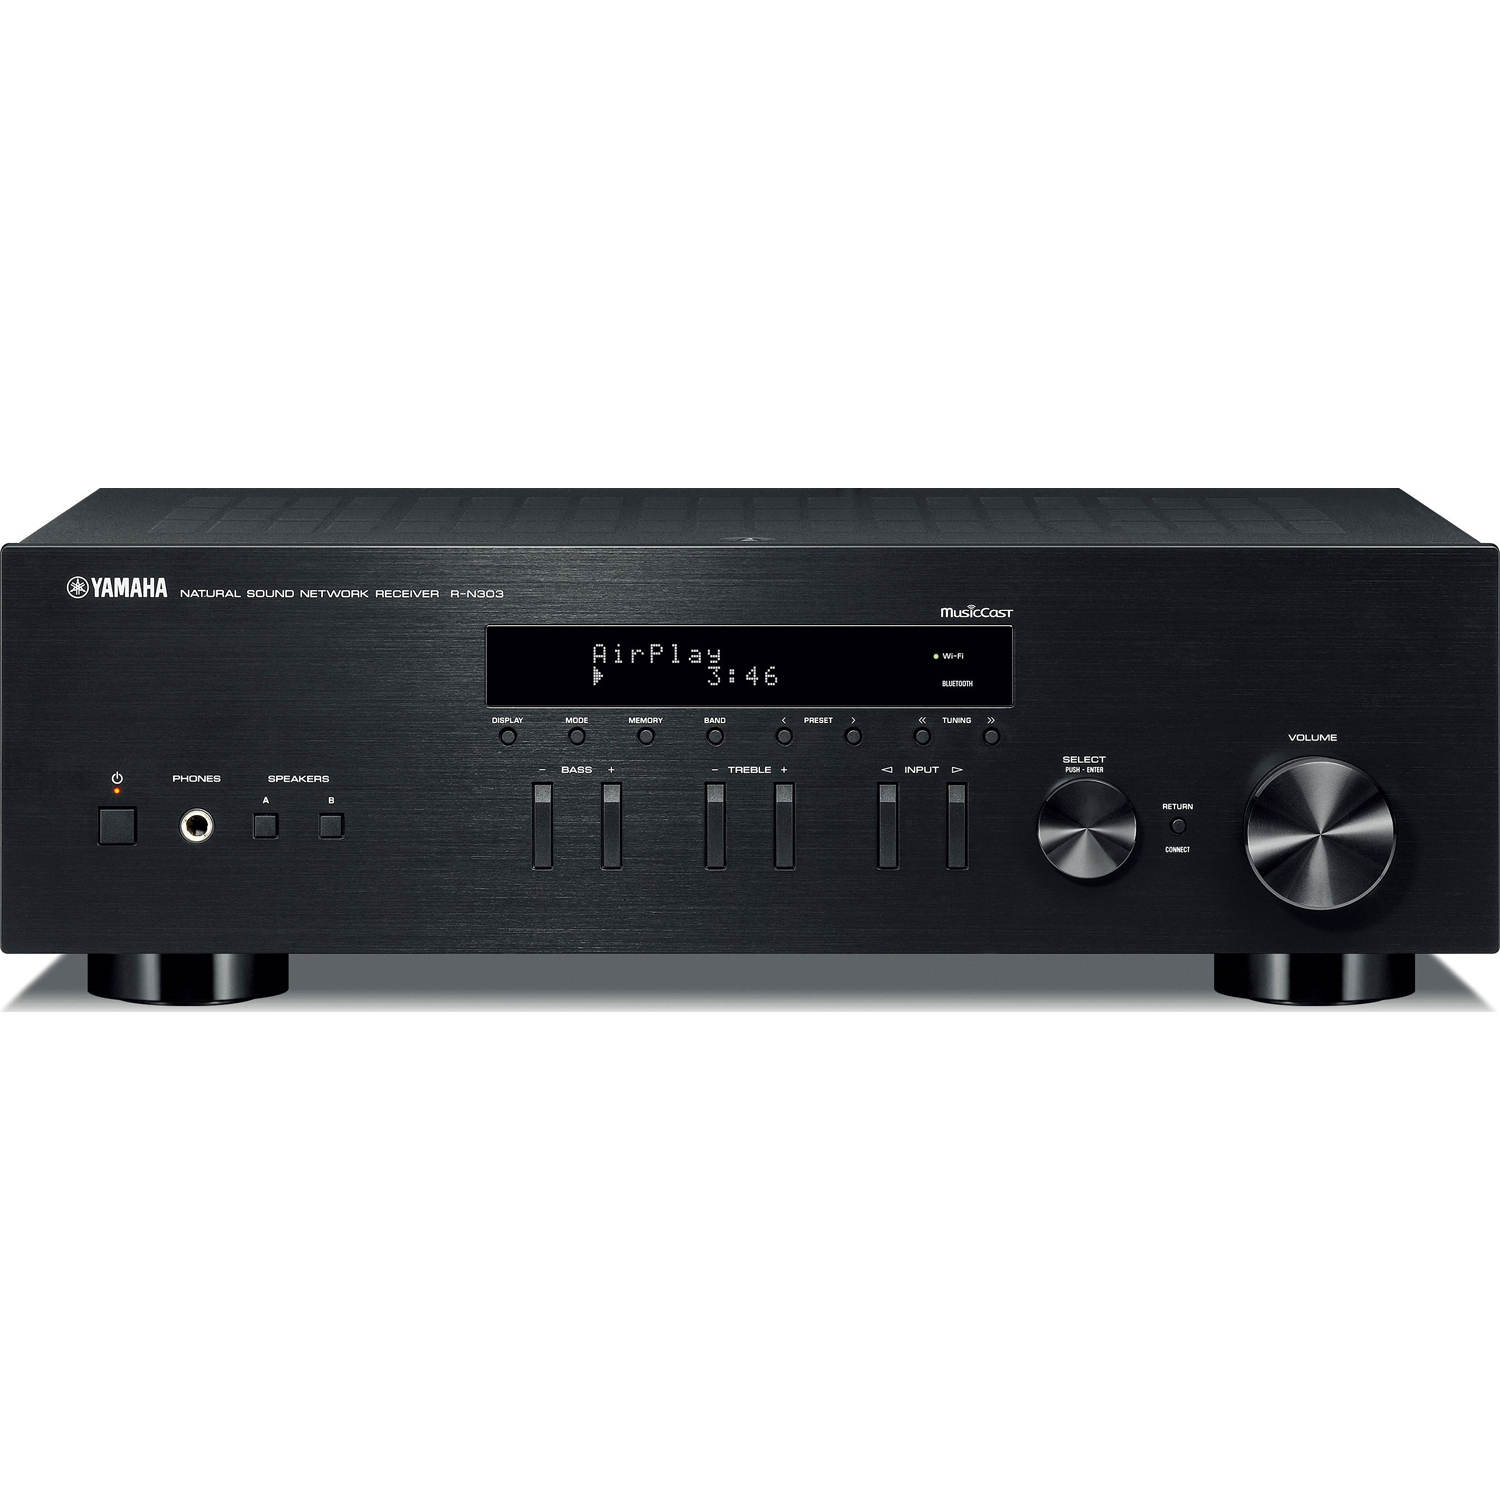 YAMAHAR-N303 2-Ch x 100 Watts Networking Stereo Receiver